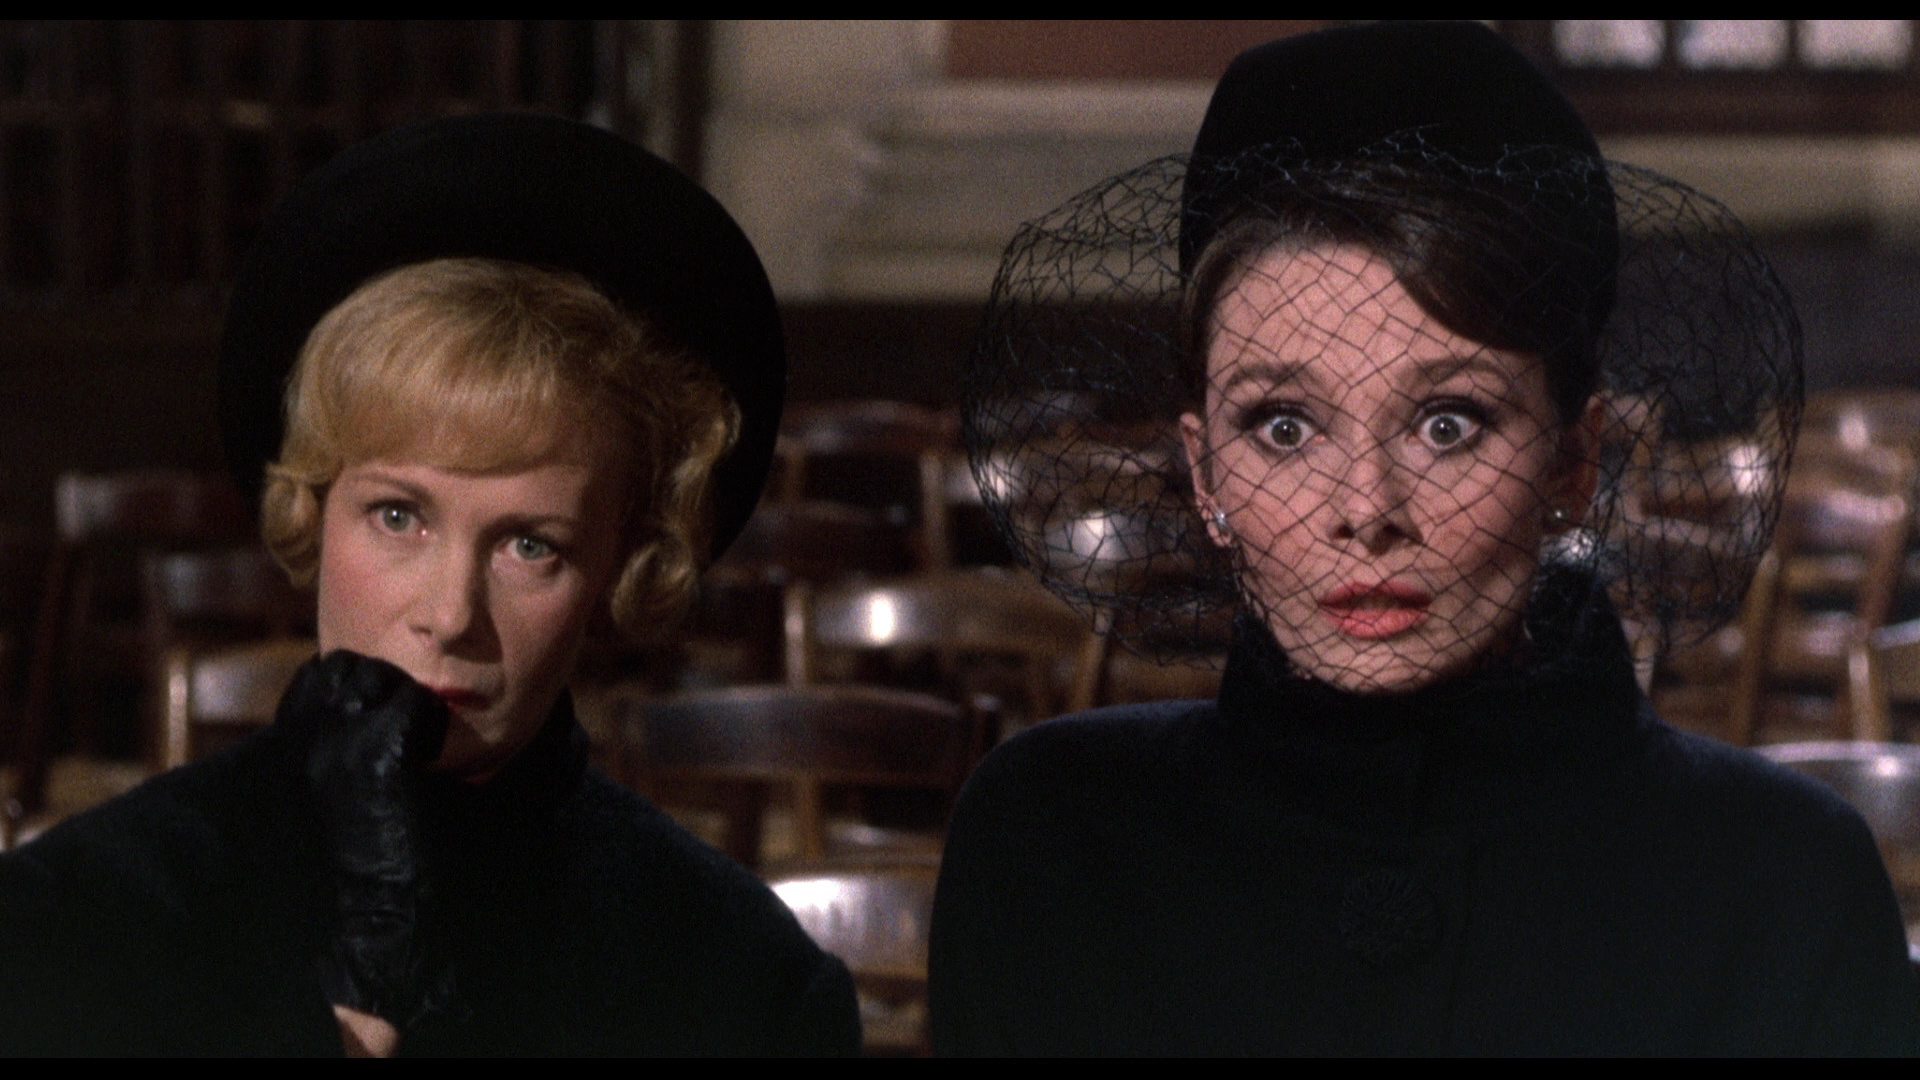 File:Charade 1963 Audrey Hepburn and Dominique Minot.jpg - Wikimedia ...